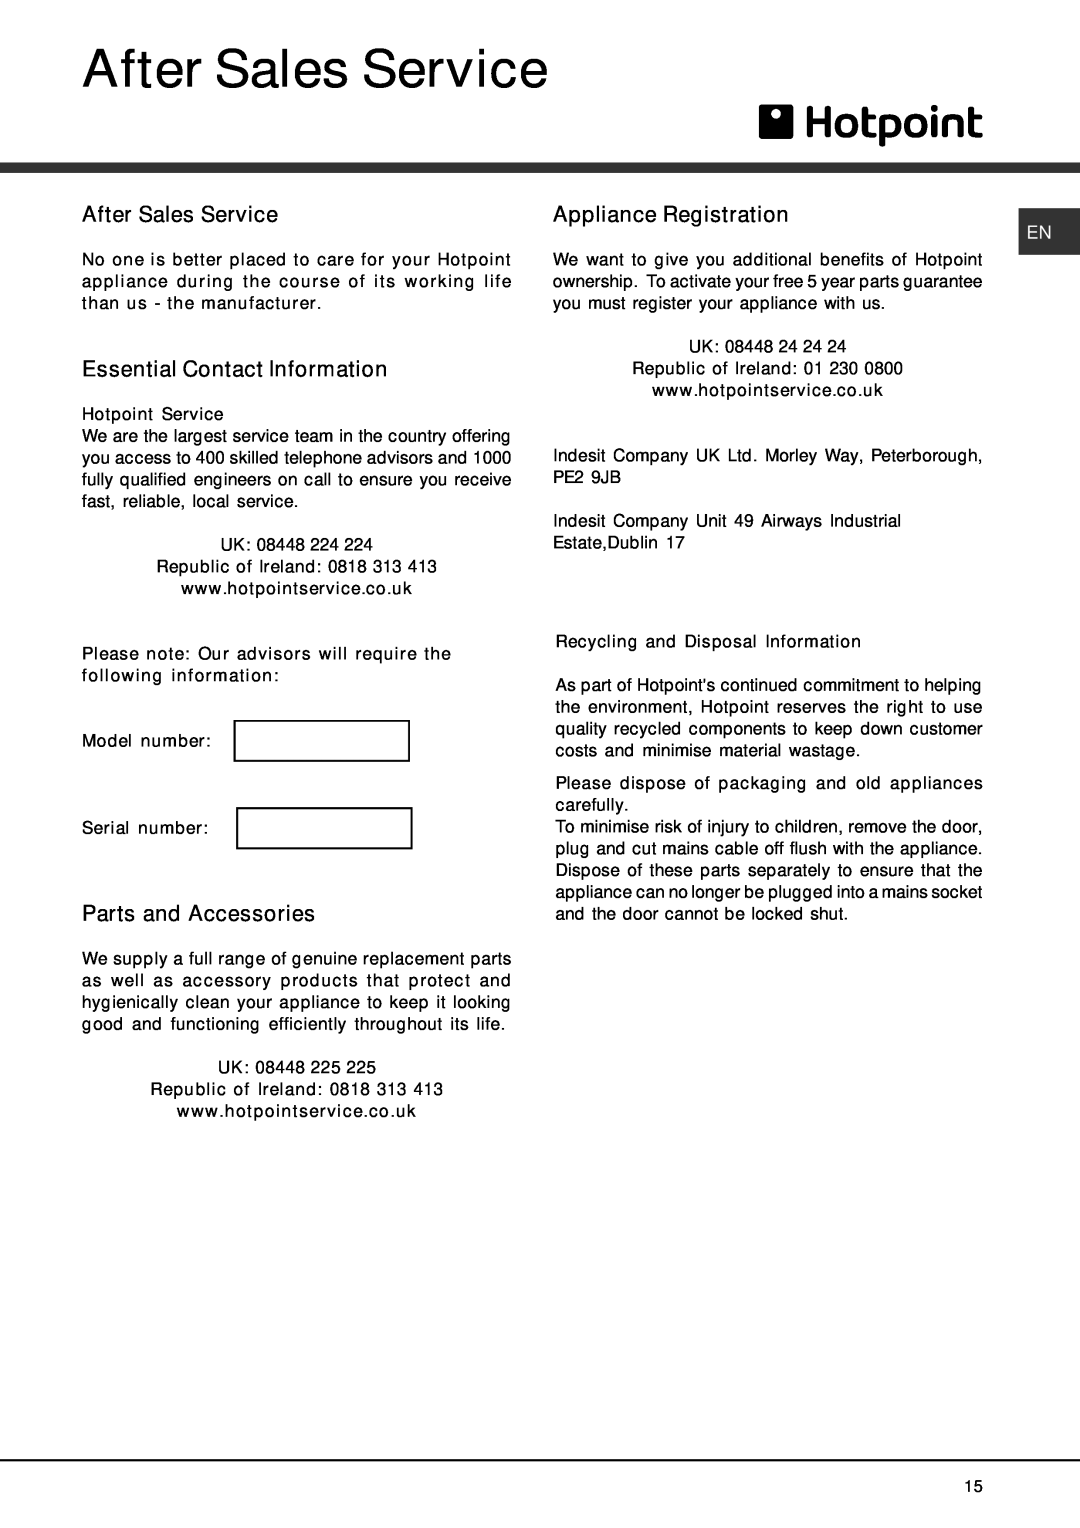 Hotpoint FDFF manual After Sales Service, Essential Contact Information, Parts and Accessories, Appliance Registration 